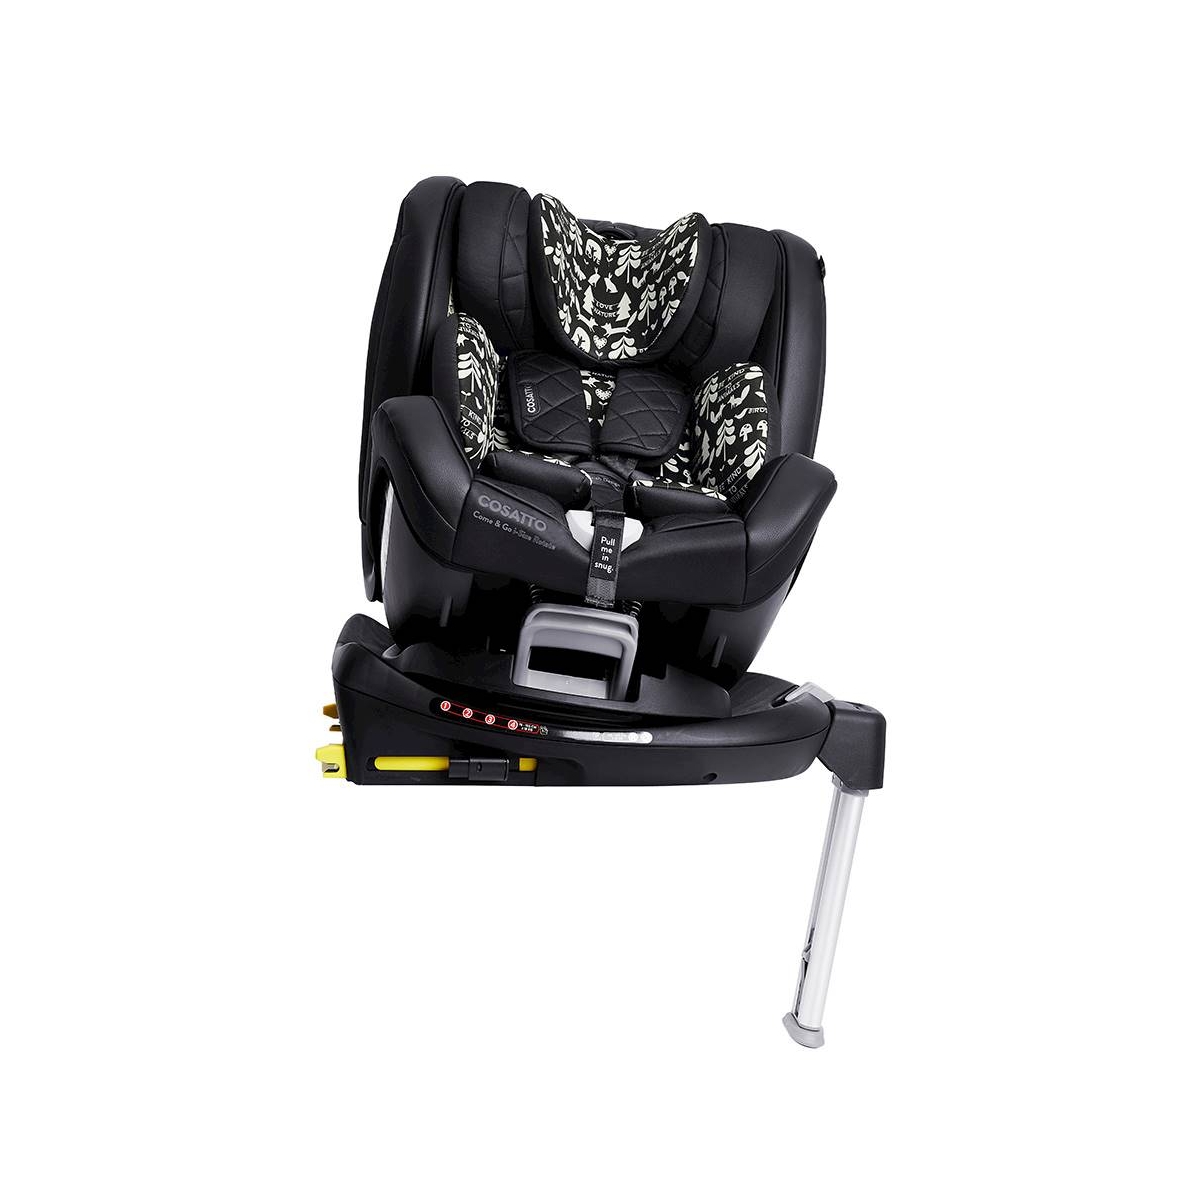 Cosatto Come and Go i-size Rotate Group 0/1 Car Seat